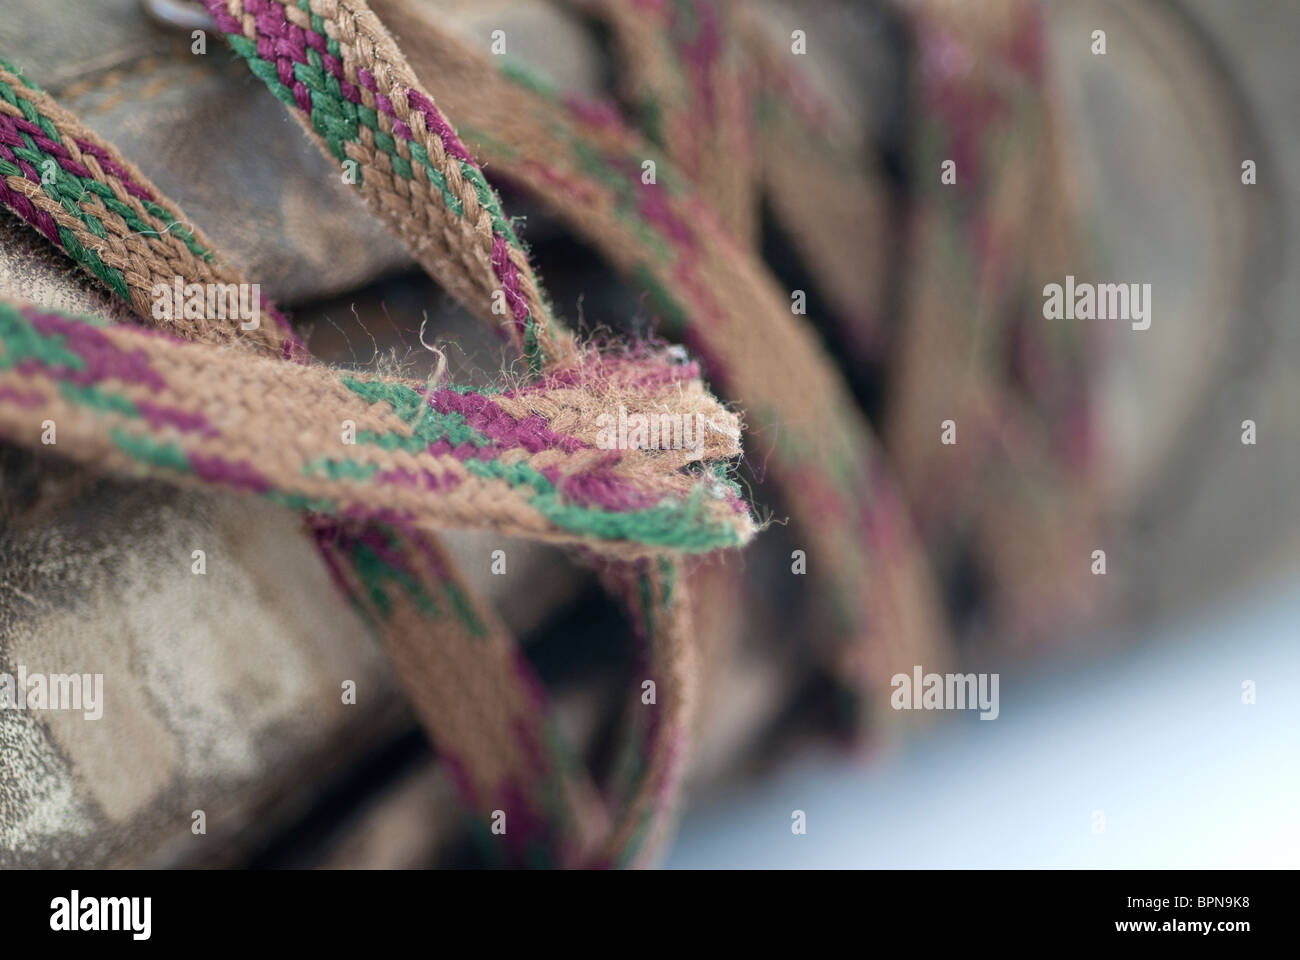 Old Shoe Laces on a Old Boot Stock Photo